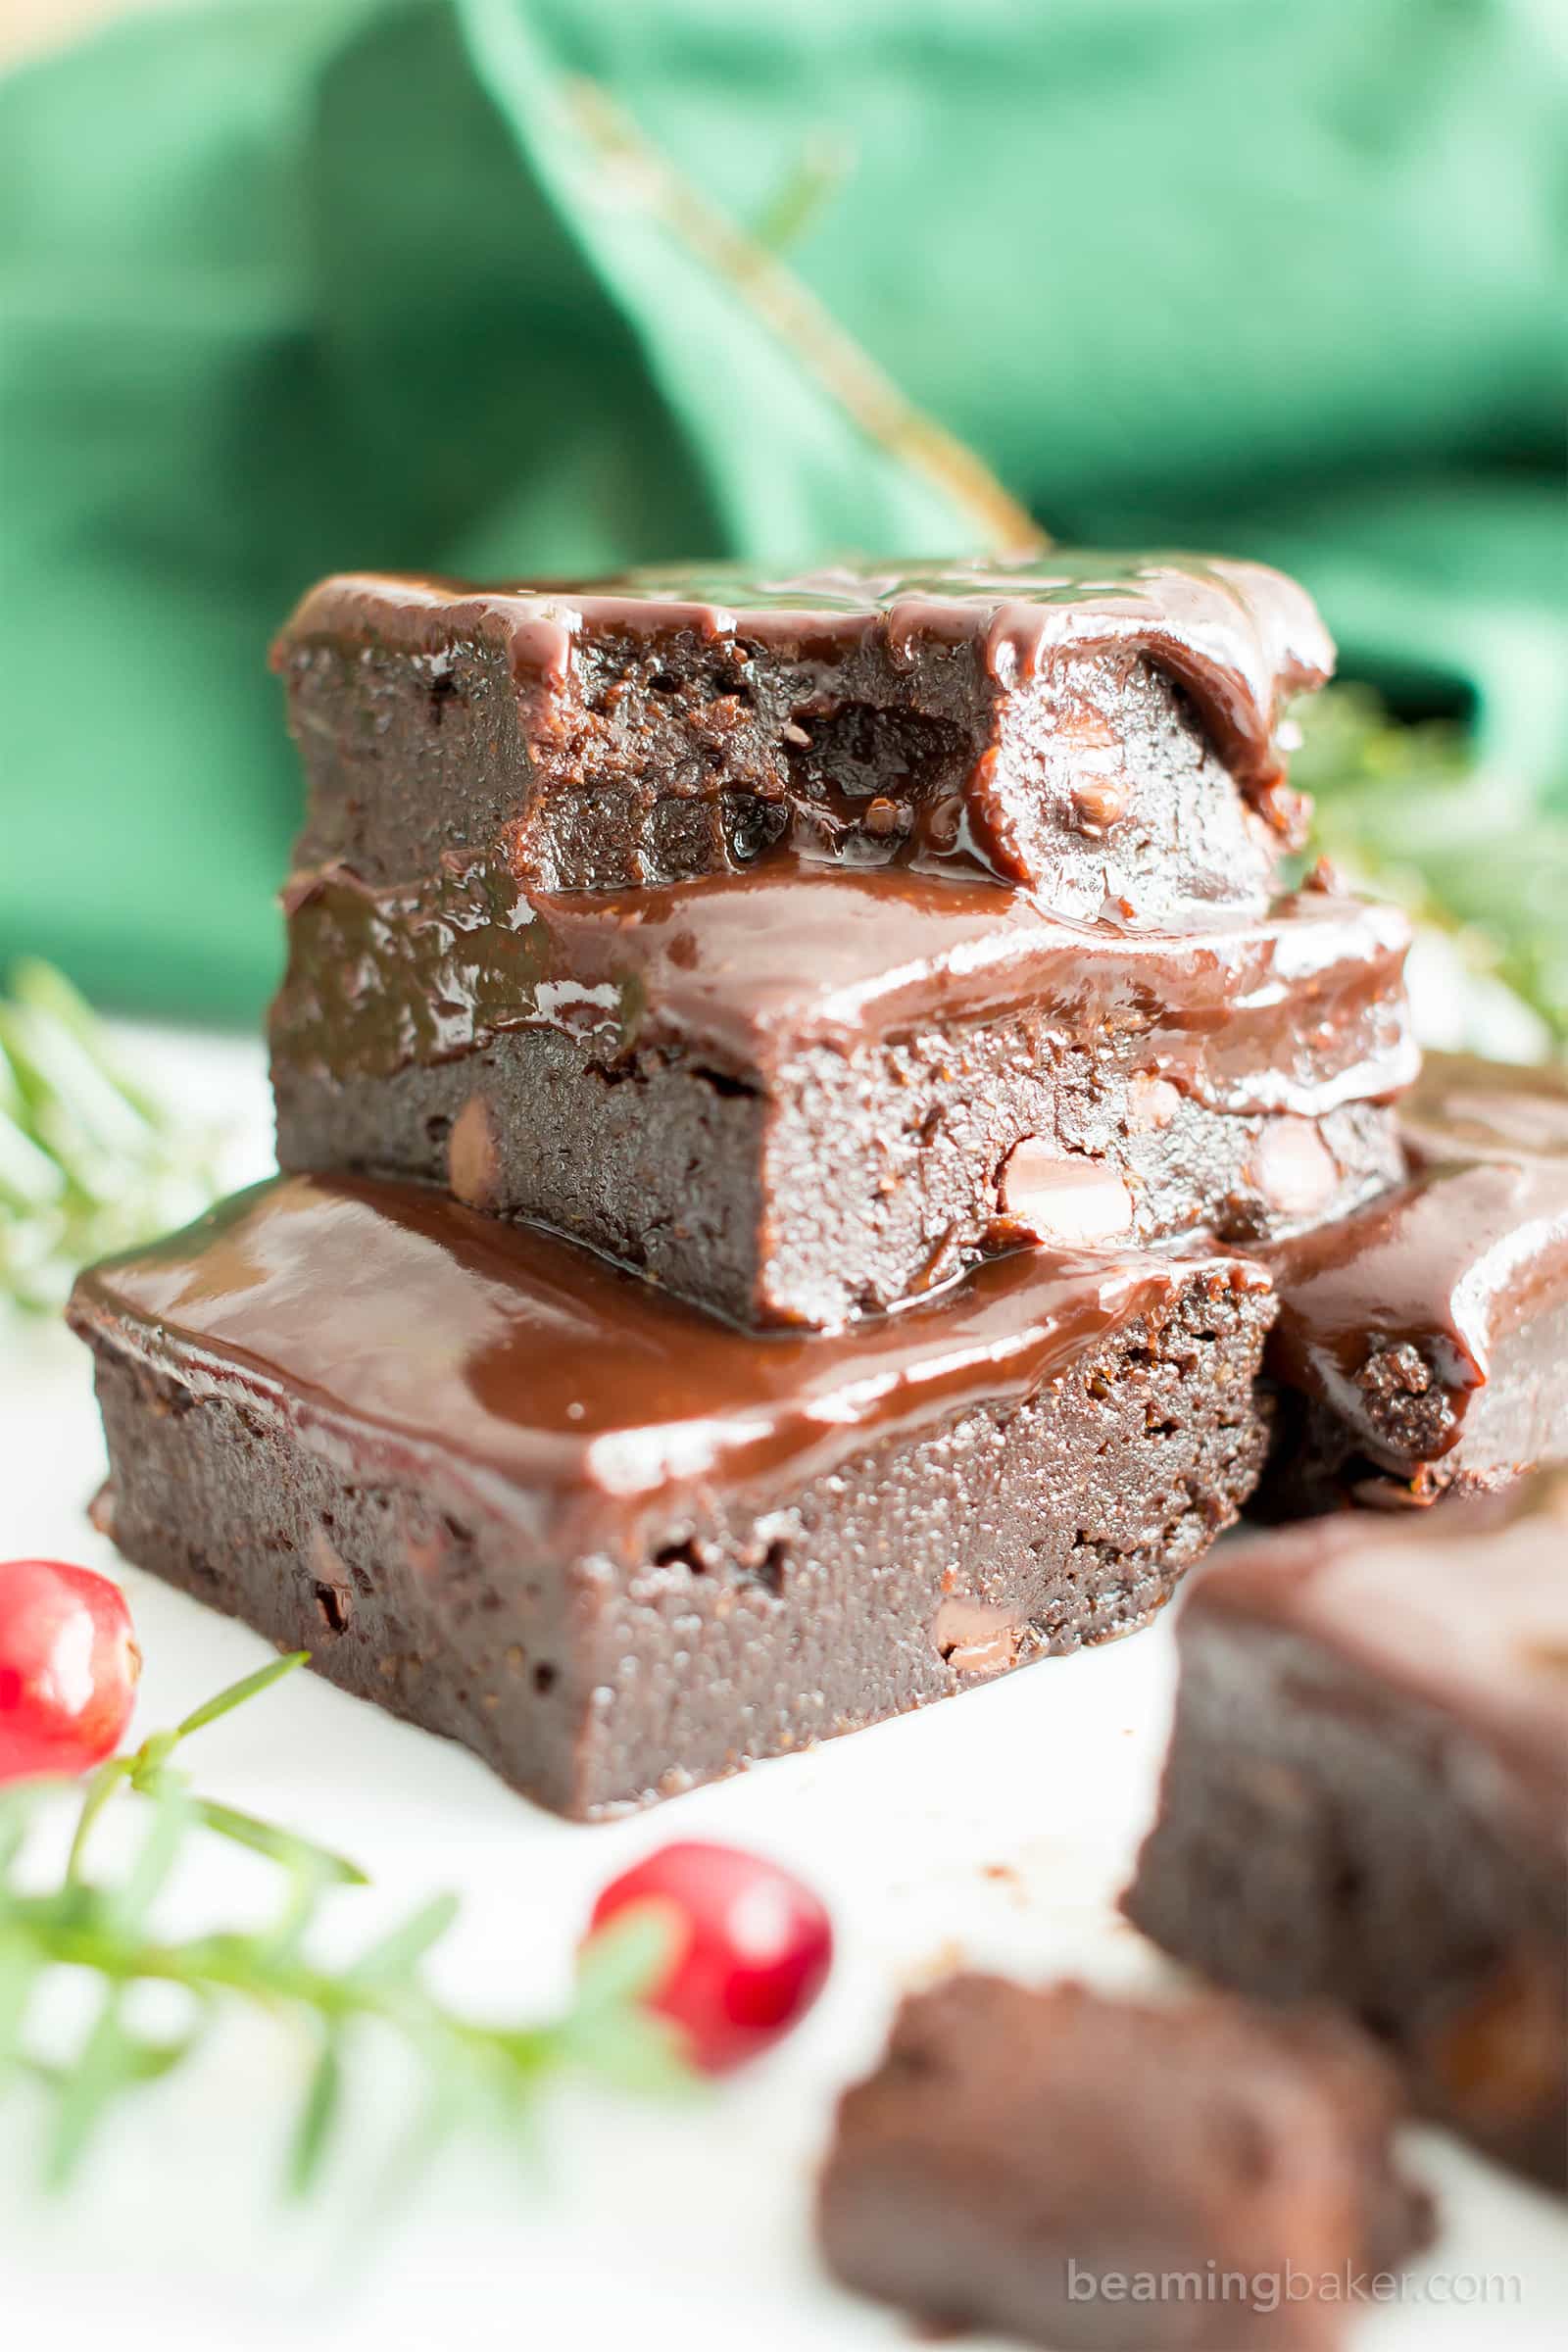 Moist & Fudgy Ganache Peppermint Brownies Recipe (V, GF): an easy recipe for indulgently fudgy, cool mint brownies topped with silky smooth chocolate ganache made with healthy ingredients. #Vegan #GlutenFree #DairyFree #HealthyHolidayDesserts #Desserts | Recipe on BeamingBaker.com